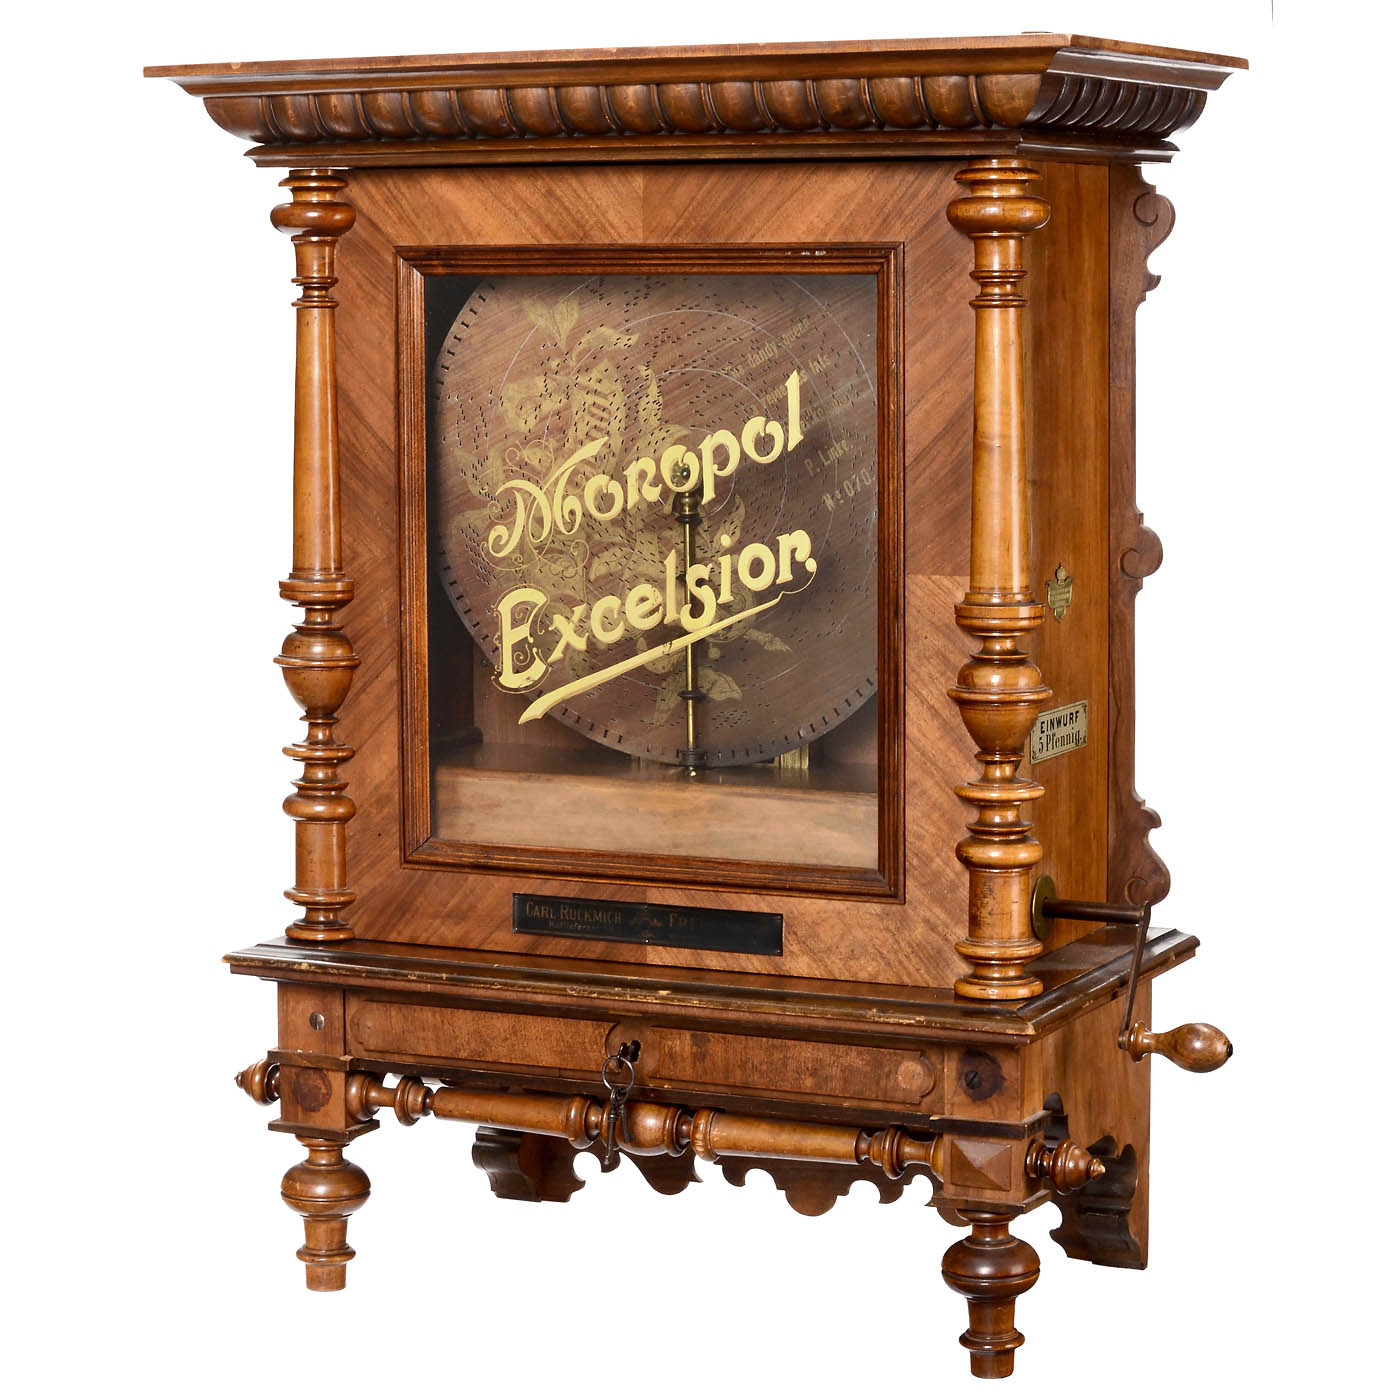 Monopol Excelsior 17 1/8-Inch Disc Musical Box No. 83, c. 1900 - Image 2 of 5